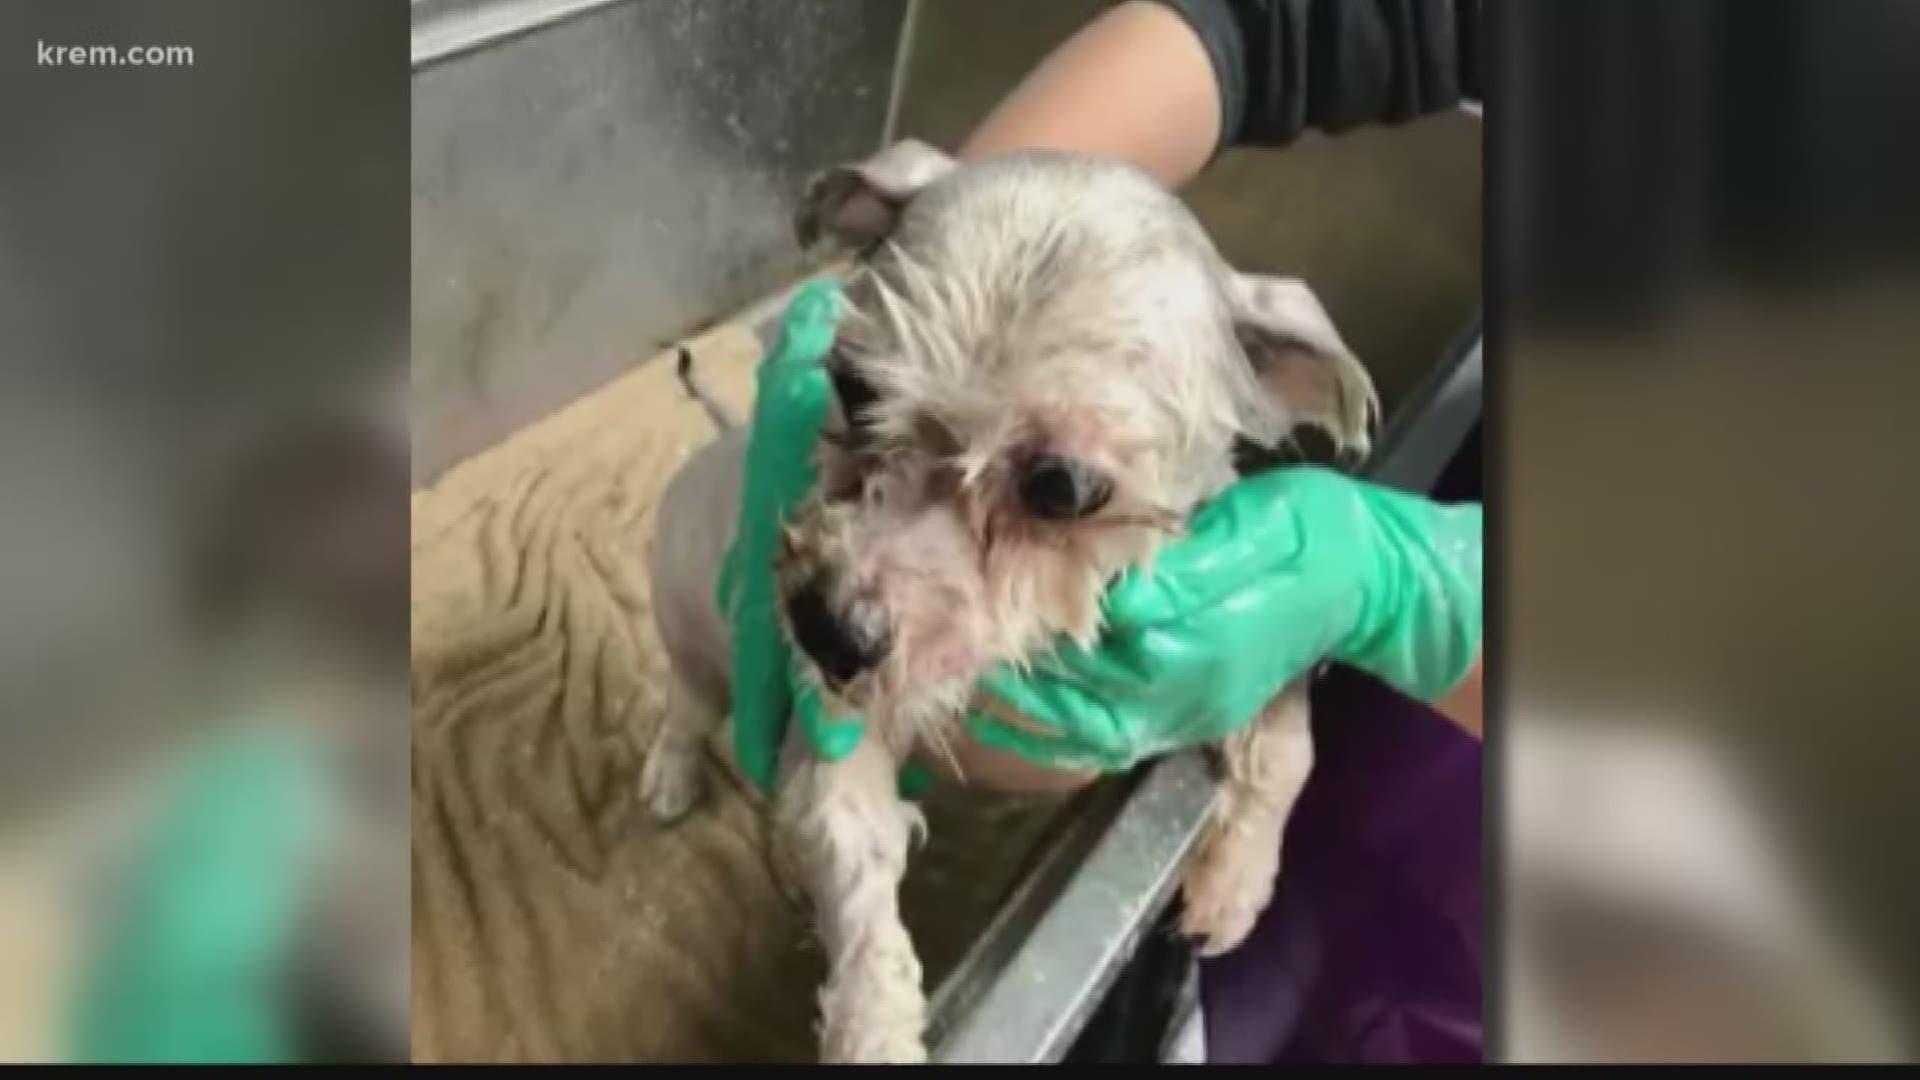 The Humane Society said the dogs' owner asked to have the dogs euthanized because they would bite.